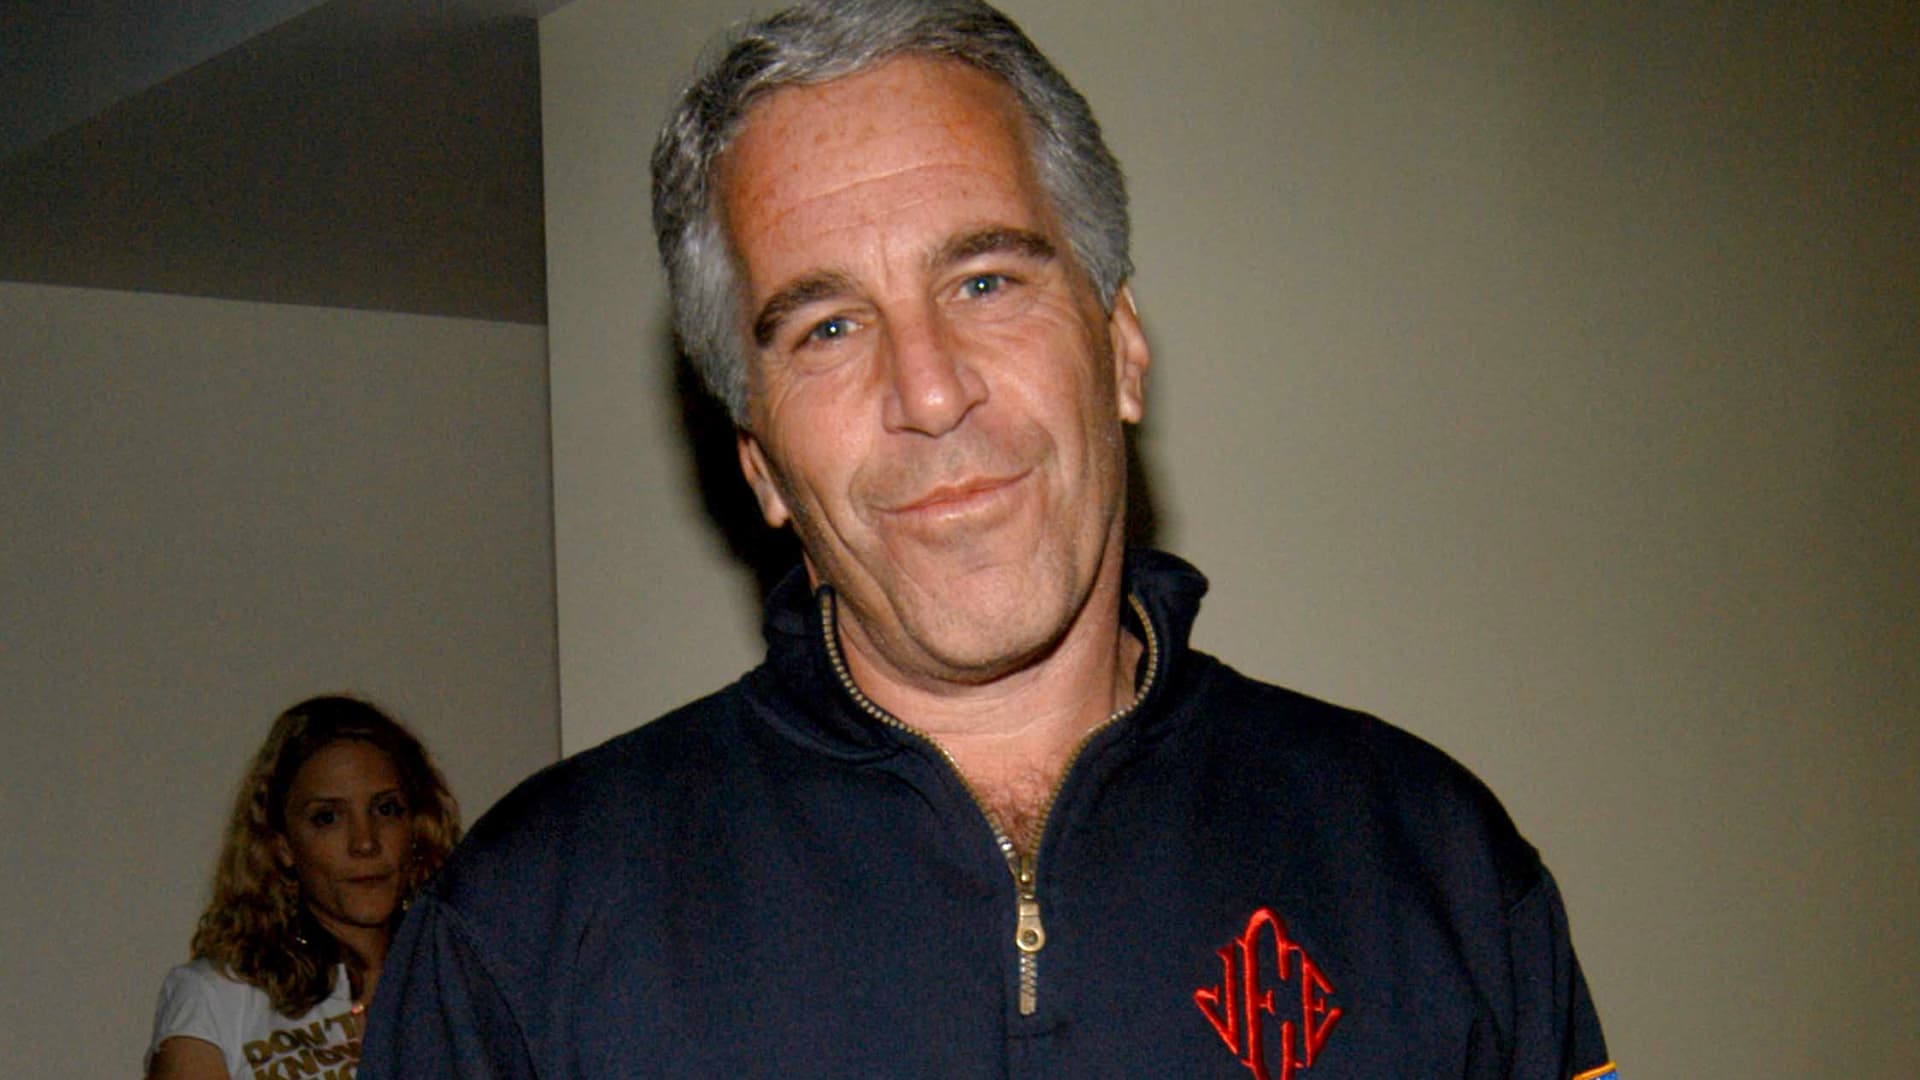 Judge warns JPMorgan Chase of contempt finding for slow-walking evidence in Jeffrey Epstein case